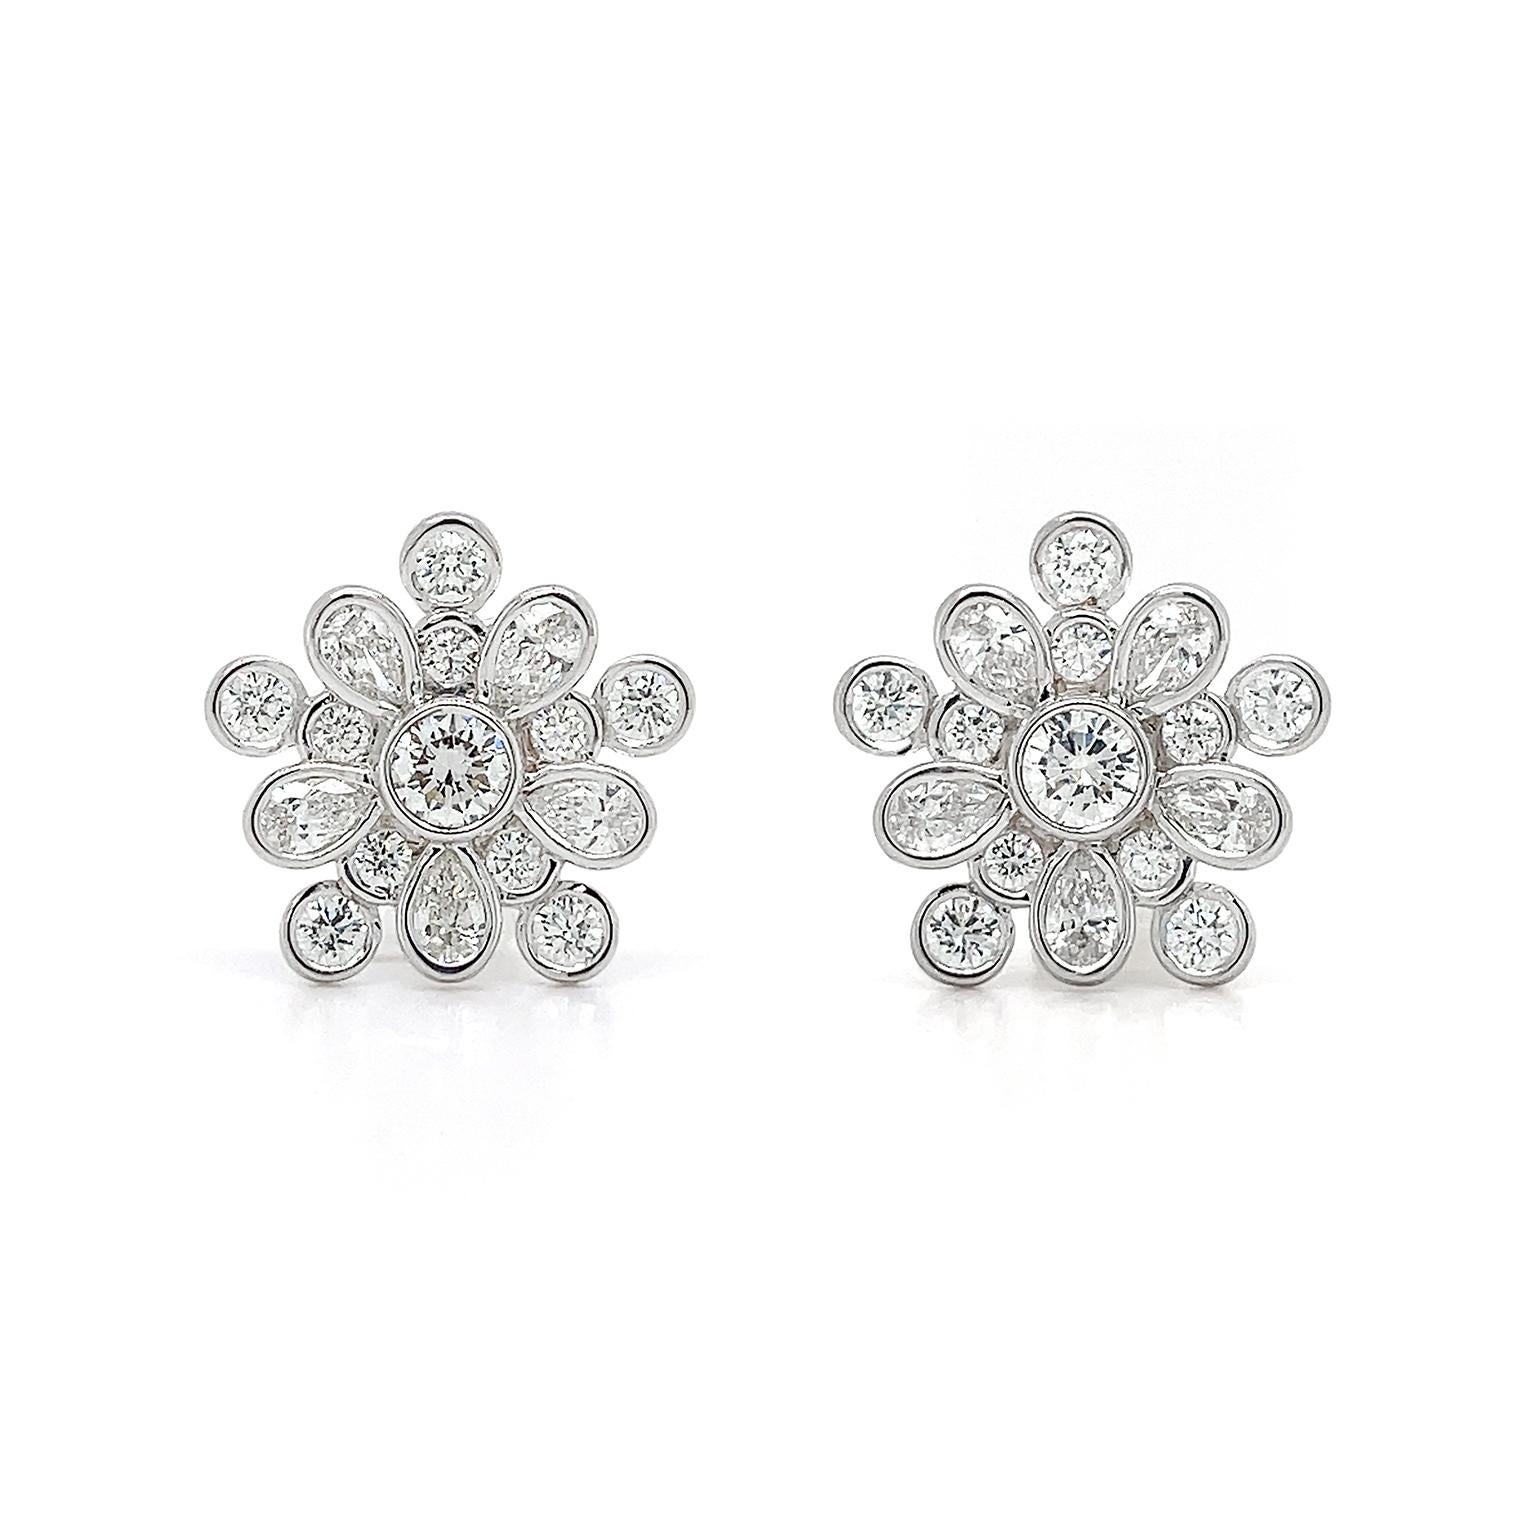 The coruscating radiance of diamonds is the essence of these earrings. A single round diamond is the heart of the pattern, while 5 pear-shaped diamonds radiate outward. In between each pear-shaped diamond is an individual round diamond, while a